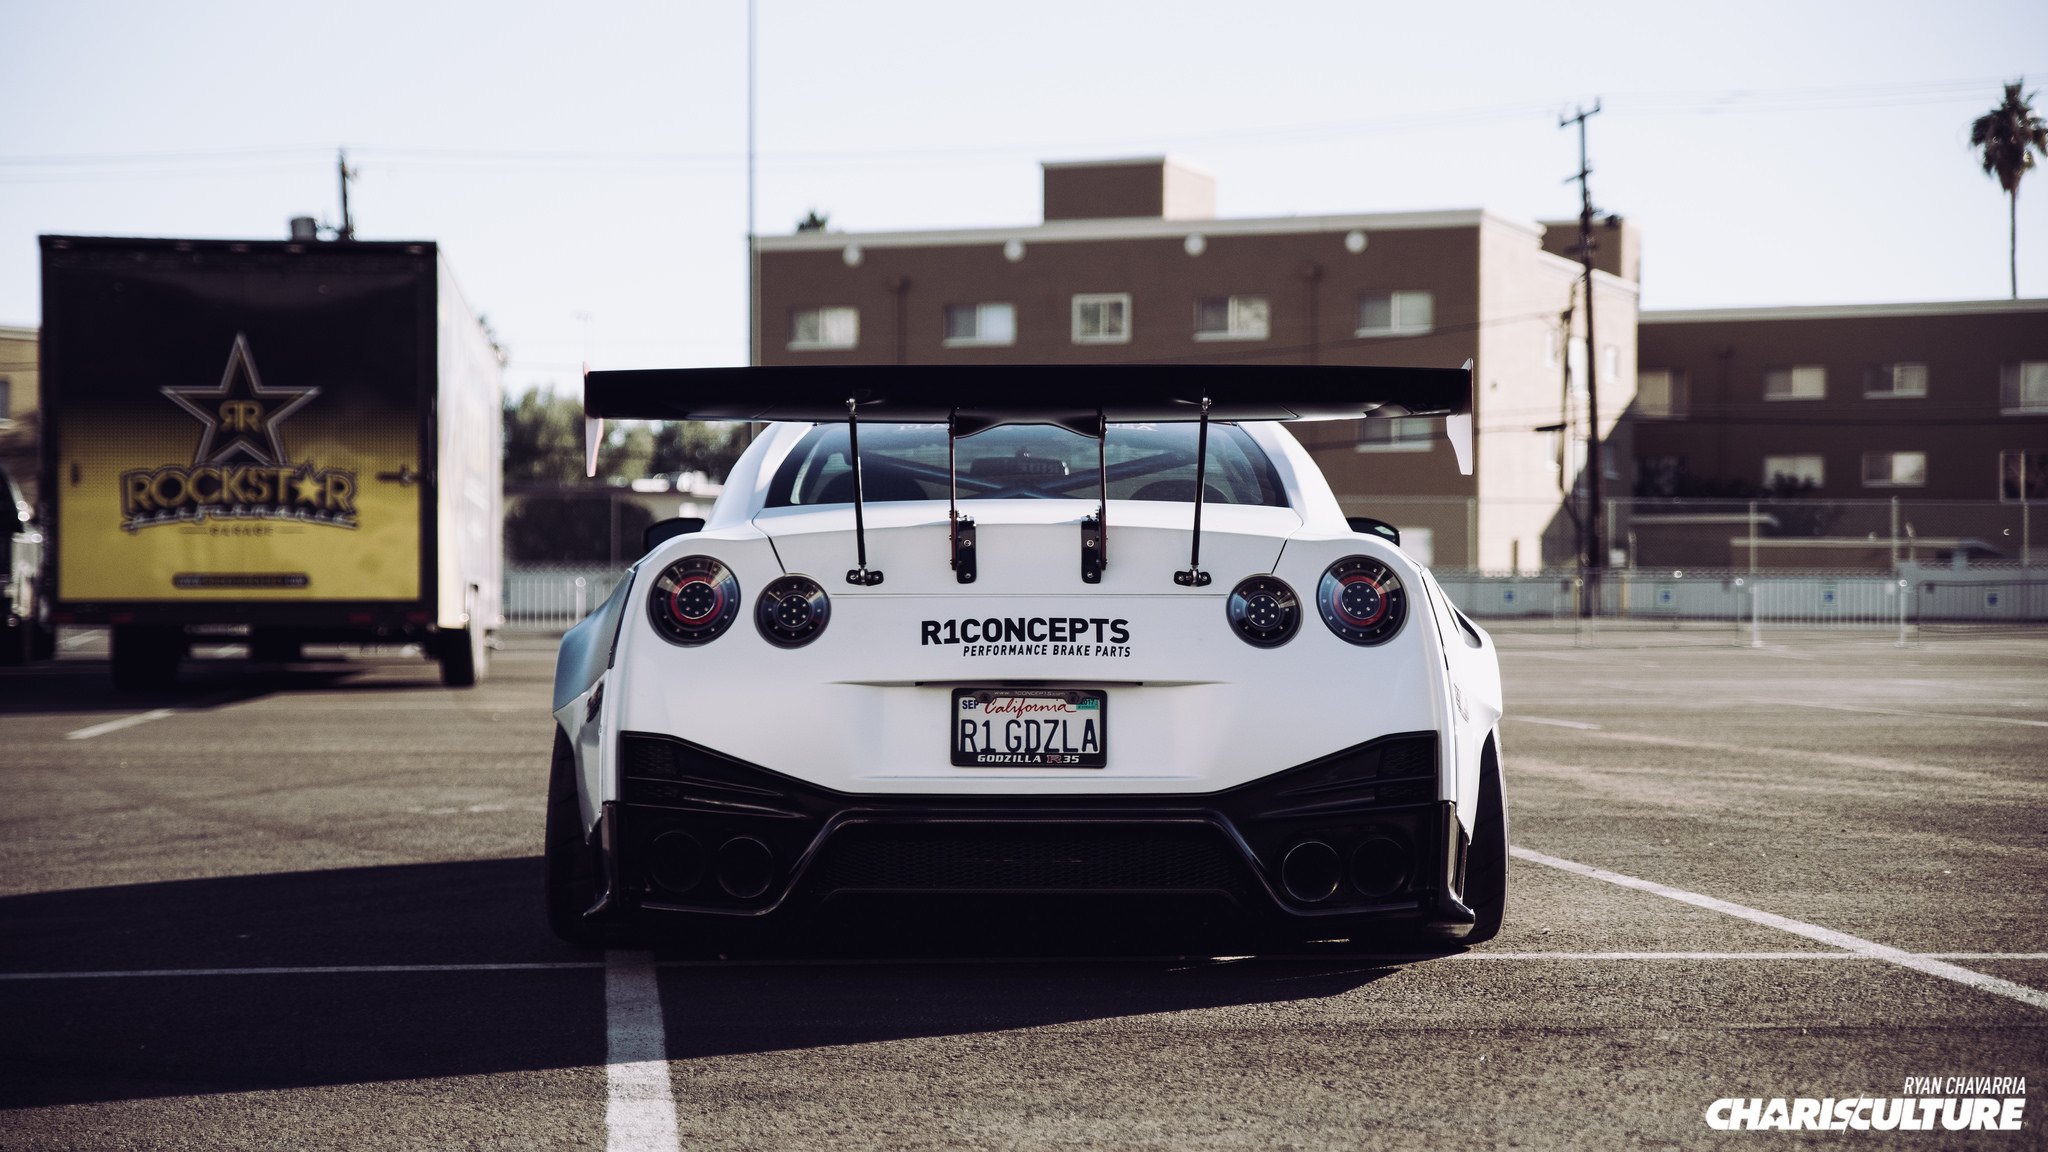 White Nissan GT-R with Aftermarket Large Wing Spoiler - Photo by The Charis Culture